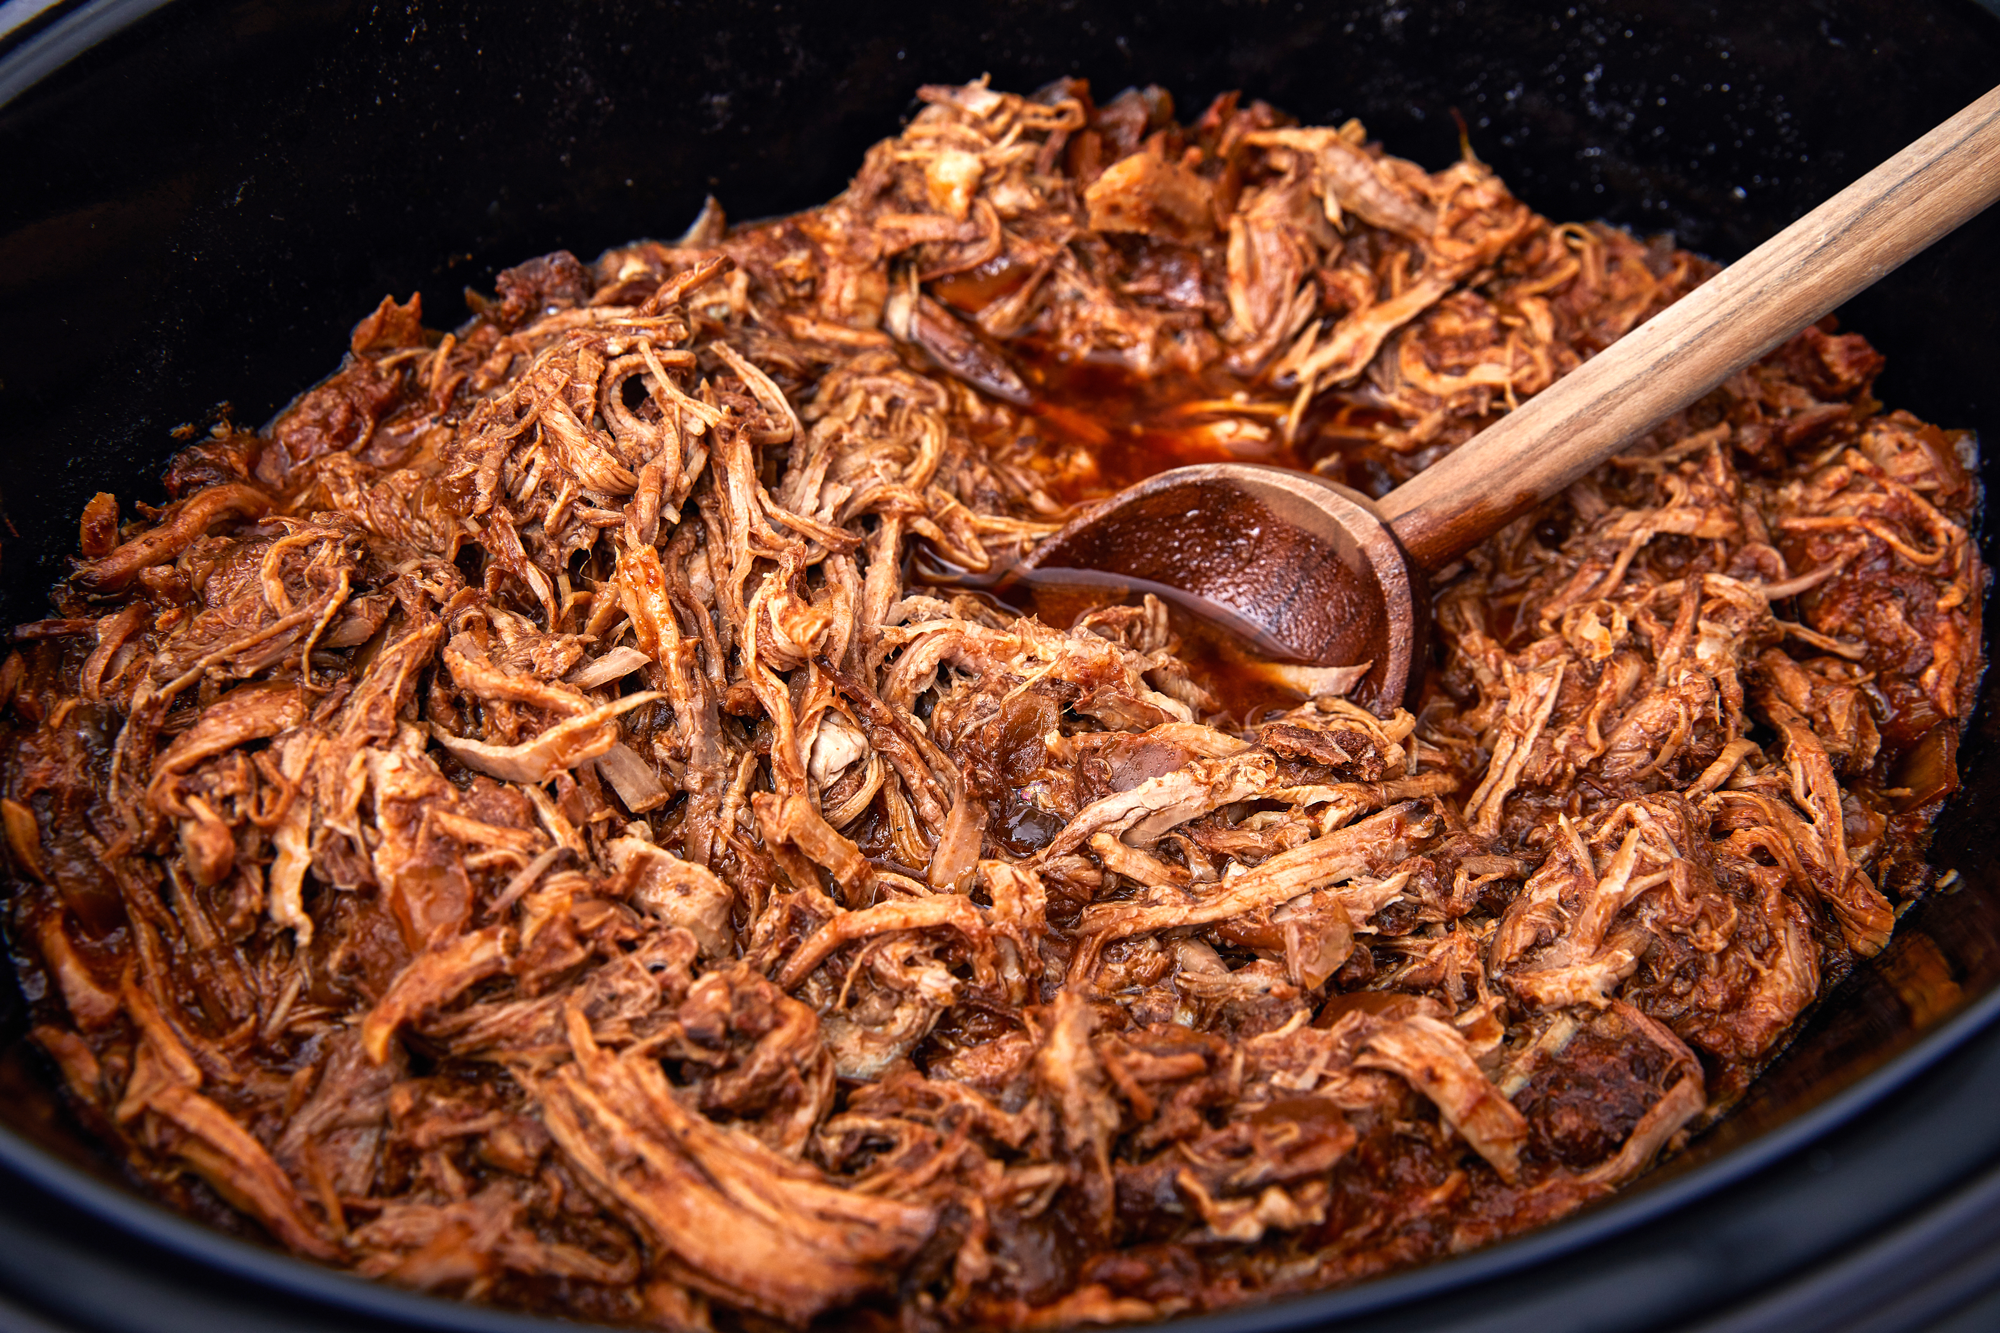 The Best Way to Prepare the Pulled Pork